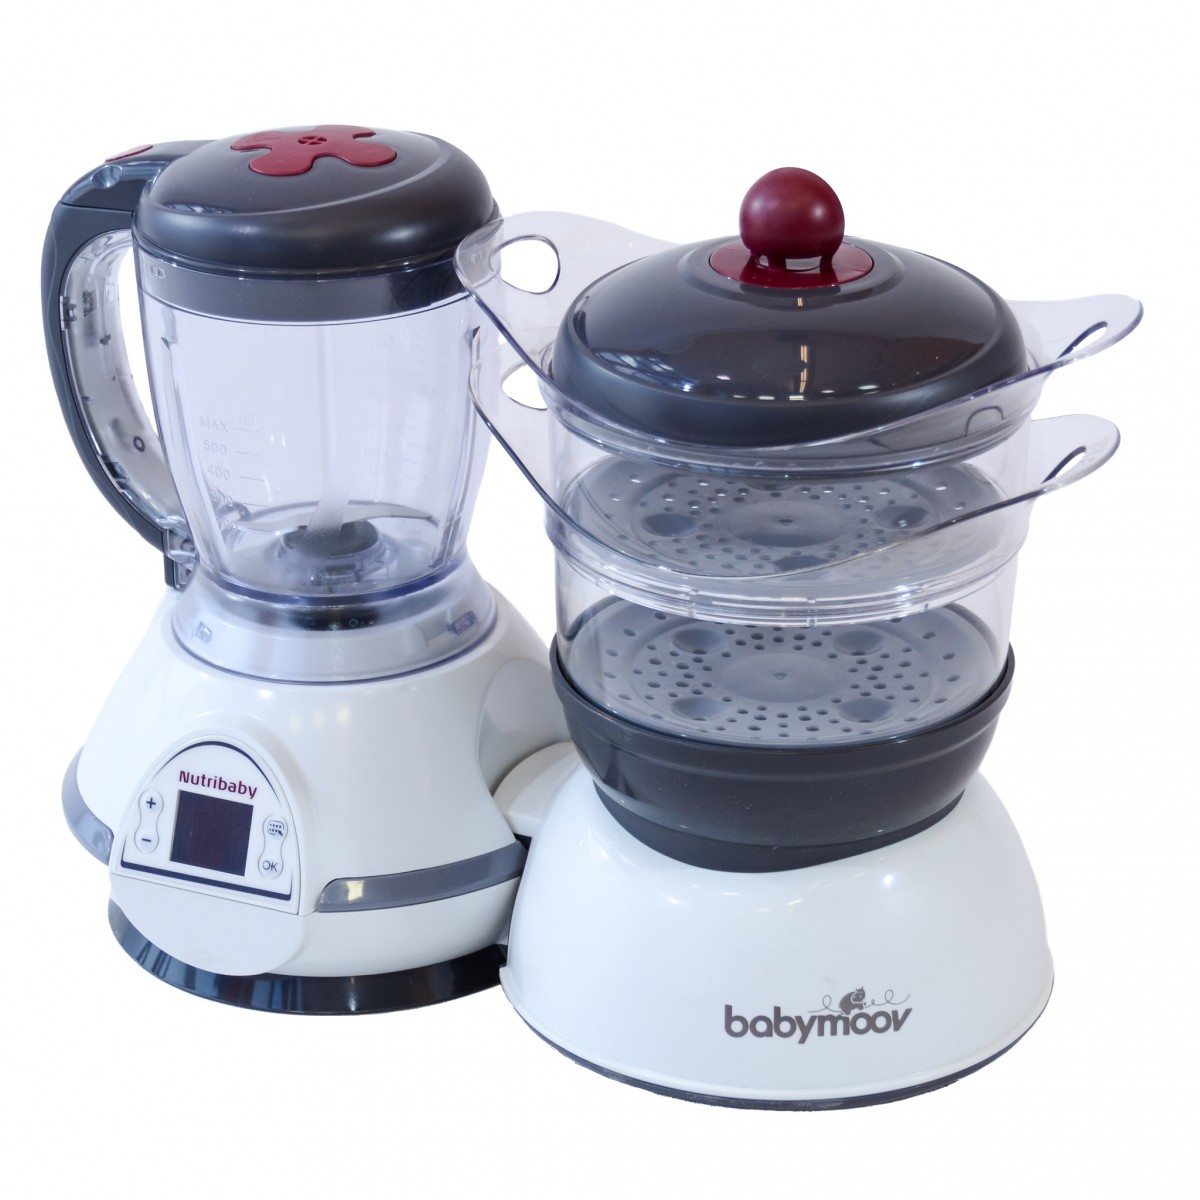 Nutribaby Duo Meal Station 5-in-1 Food Maker